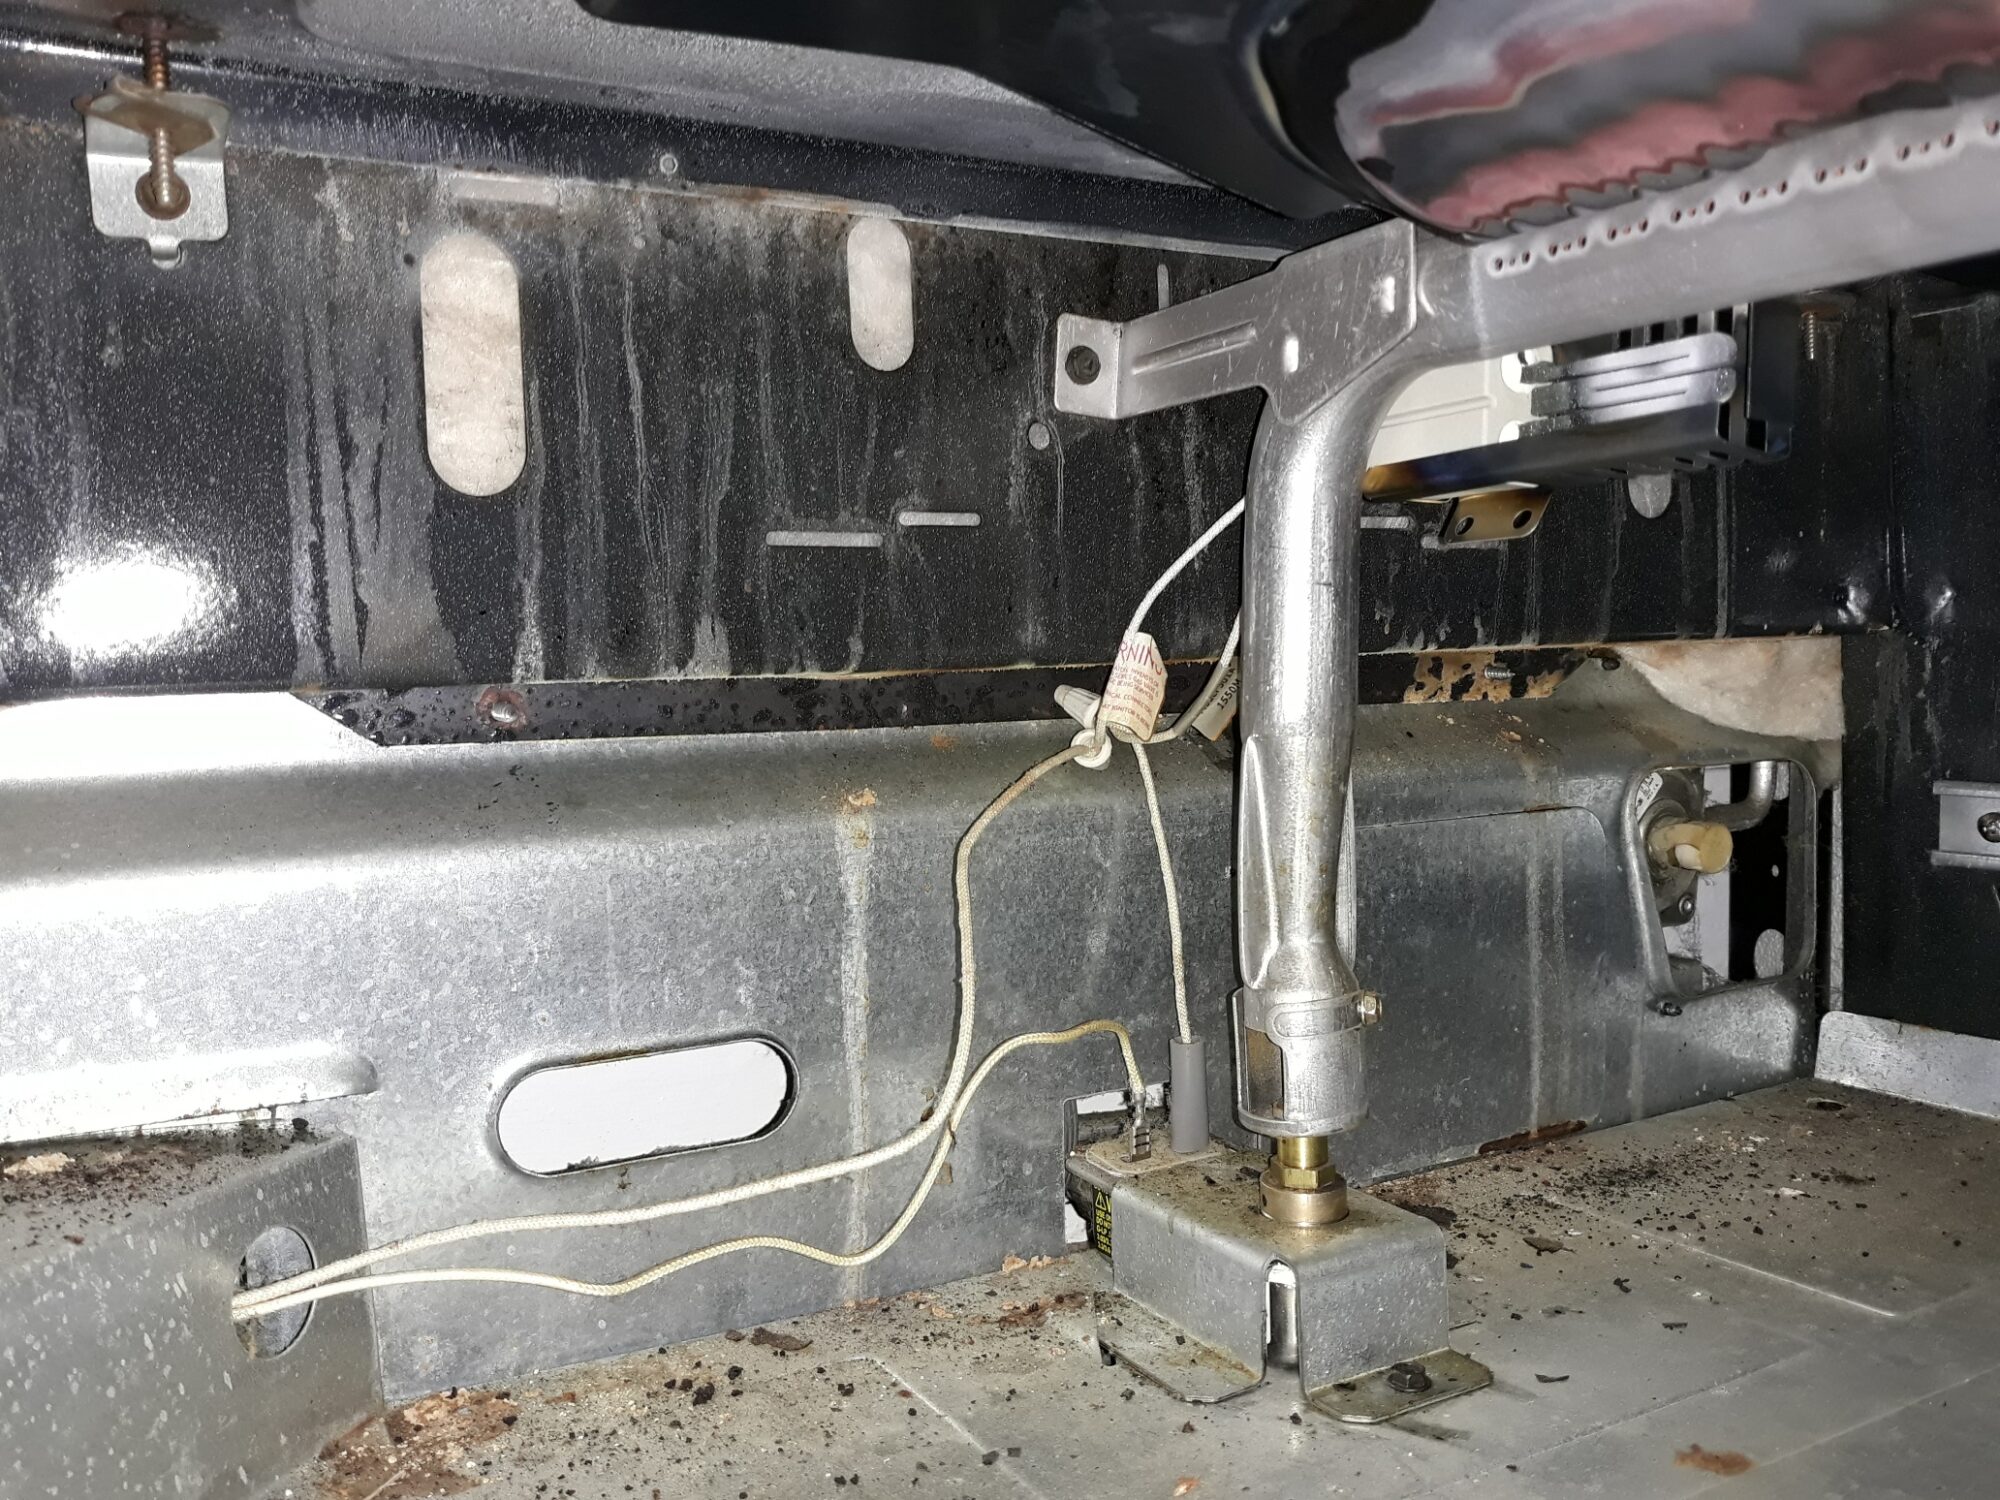 appliance repair oven repair repair require replacement of the failed gas valve switch assembly with a new igniter delmonte st baldwin fl 32234